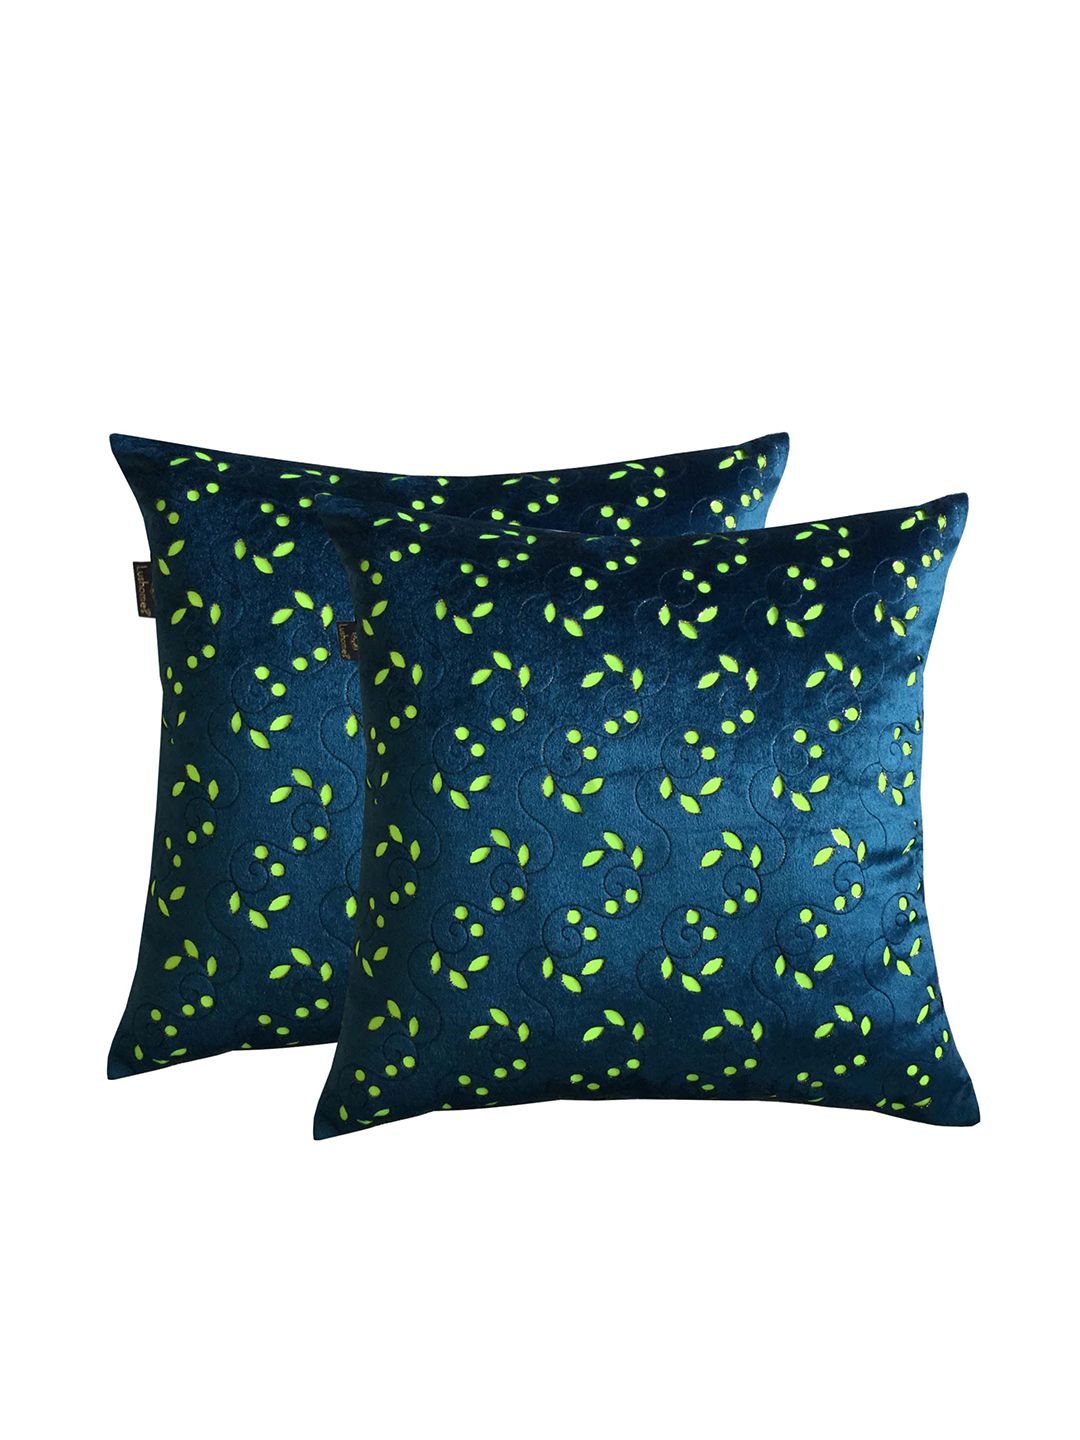 Lushomes Set Of 2 Blue & Lime Green Velvet Laser Cutting Square Cushion Covers Price in India